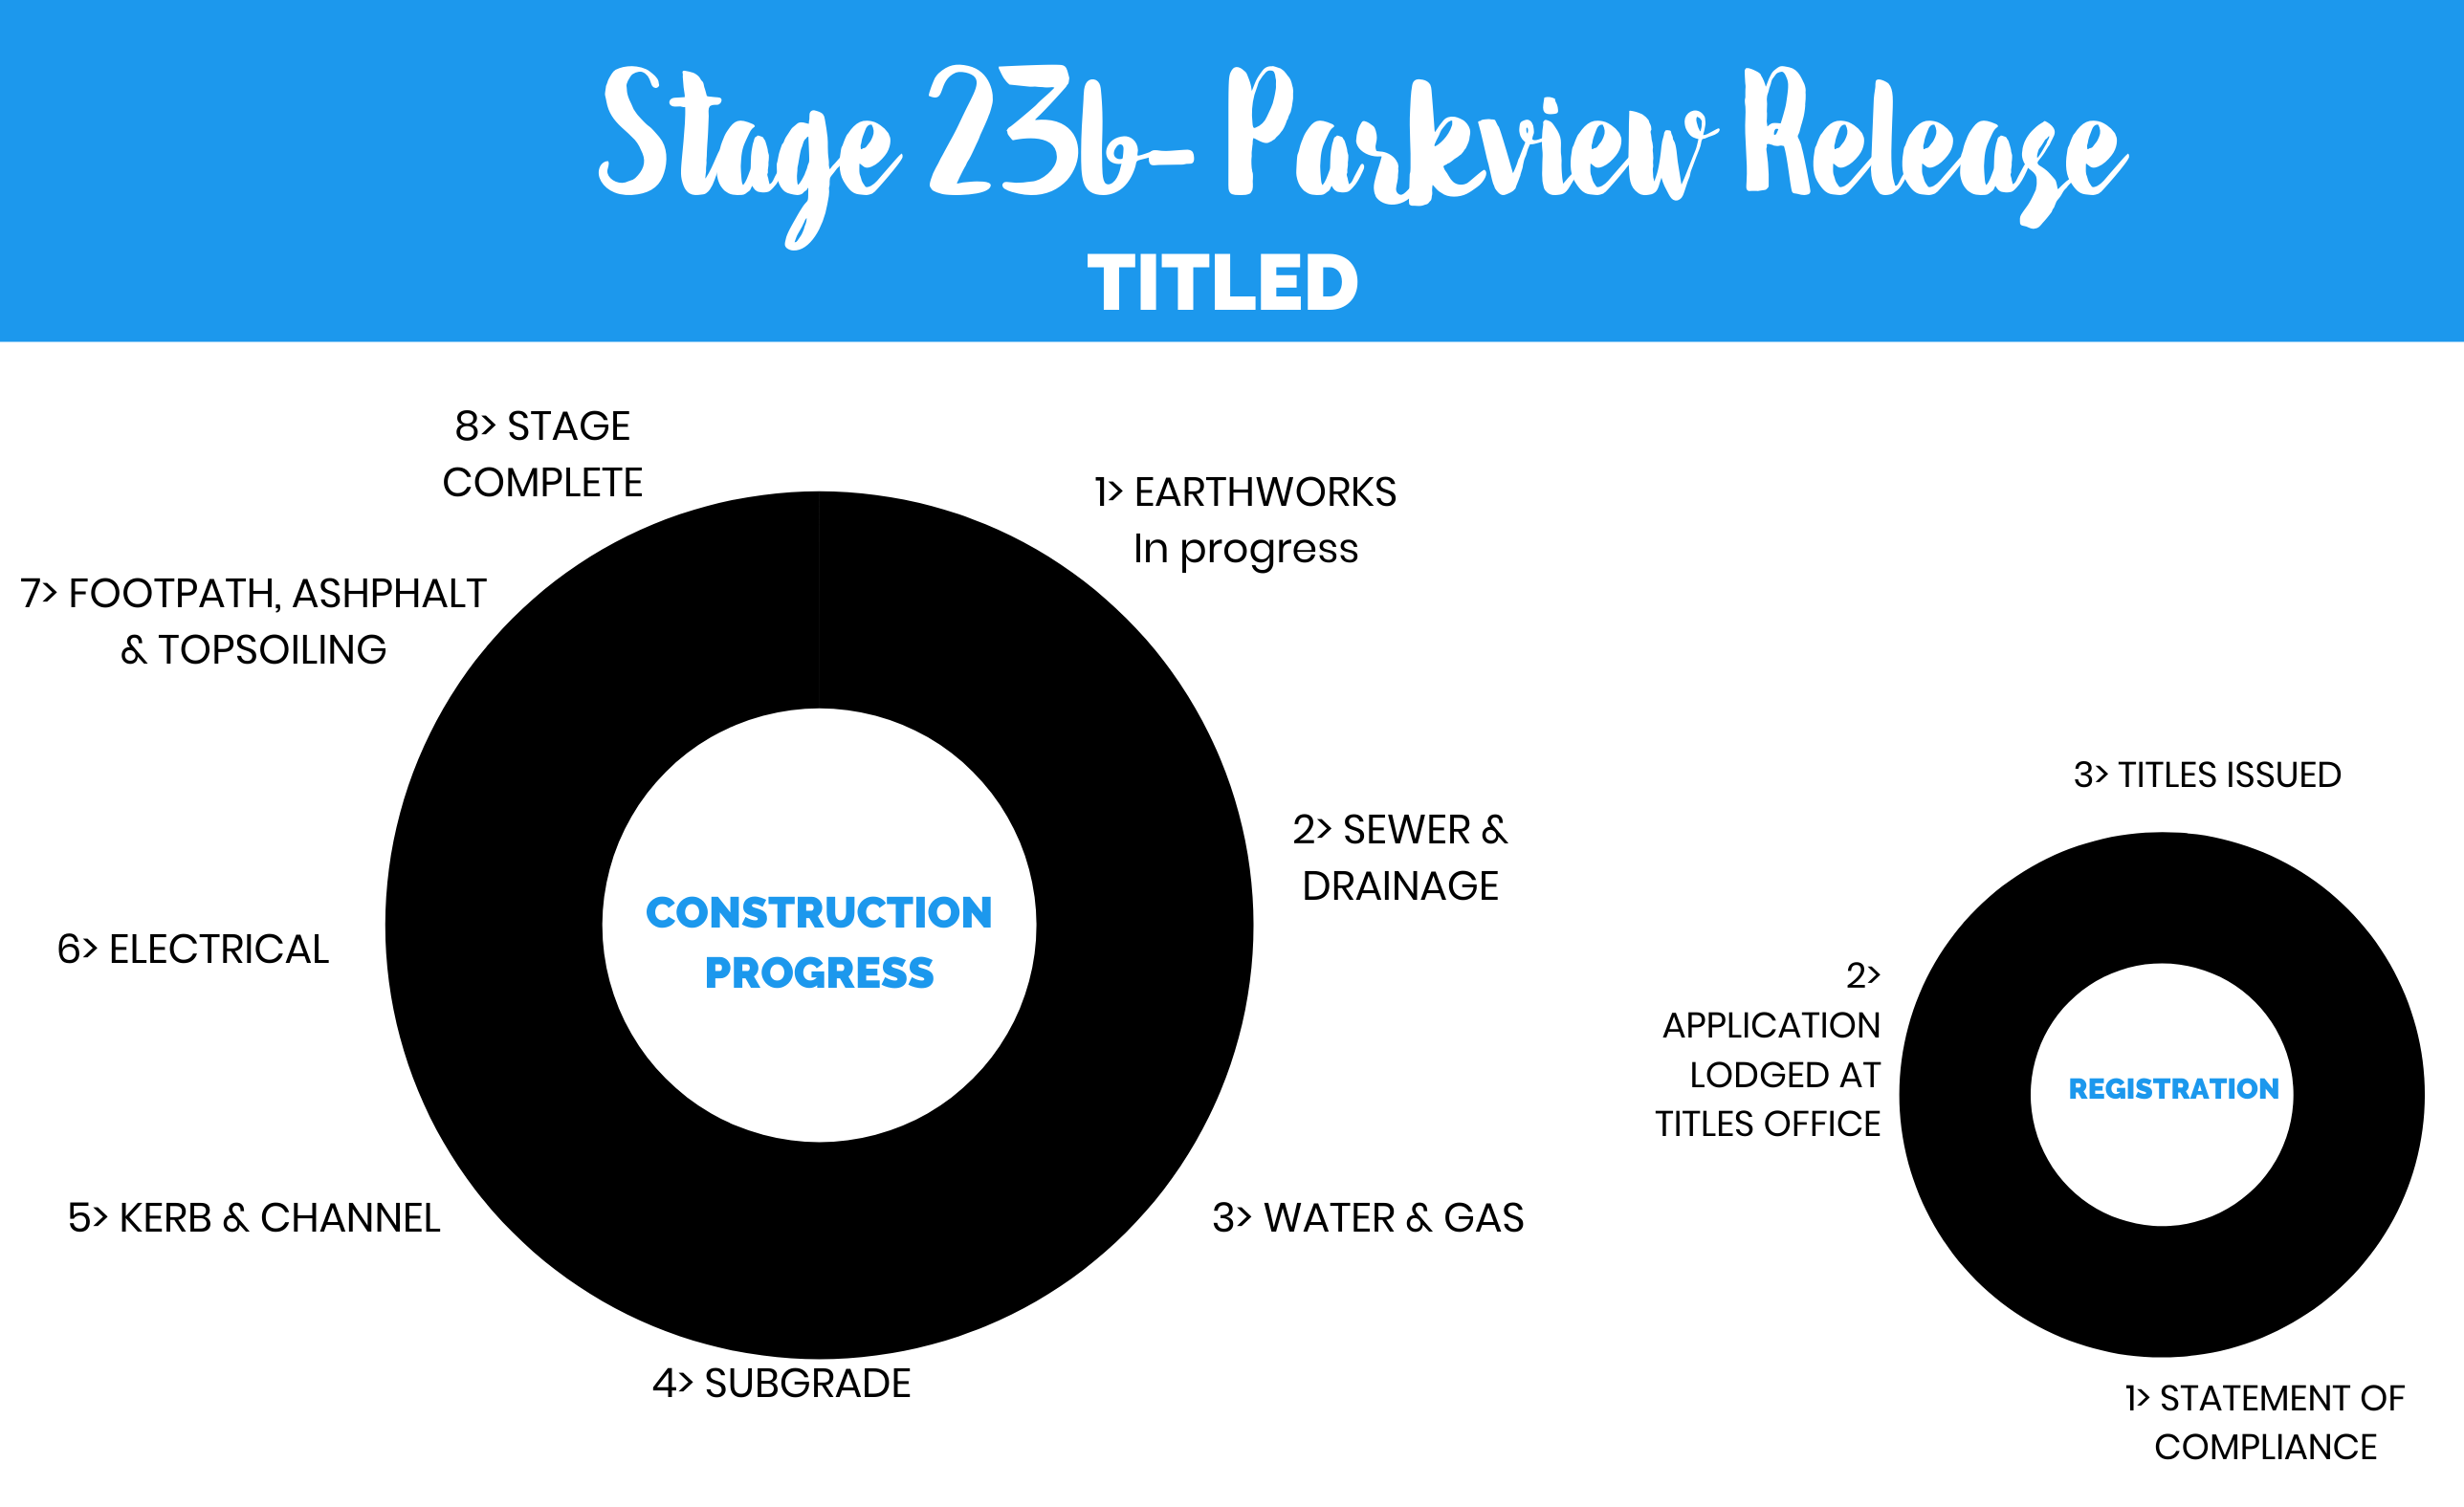 Stage 23B - Parkview Release